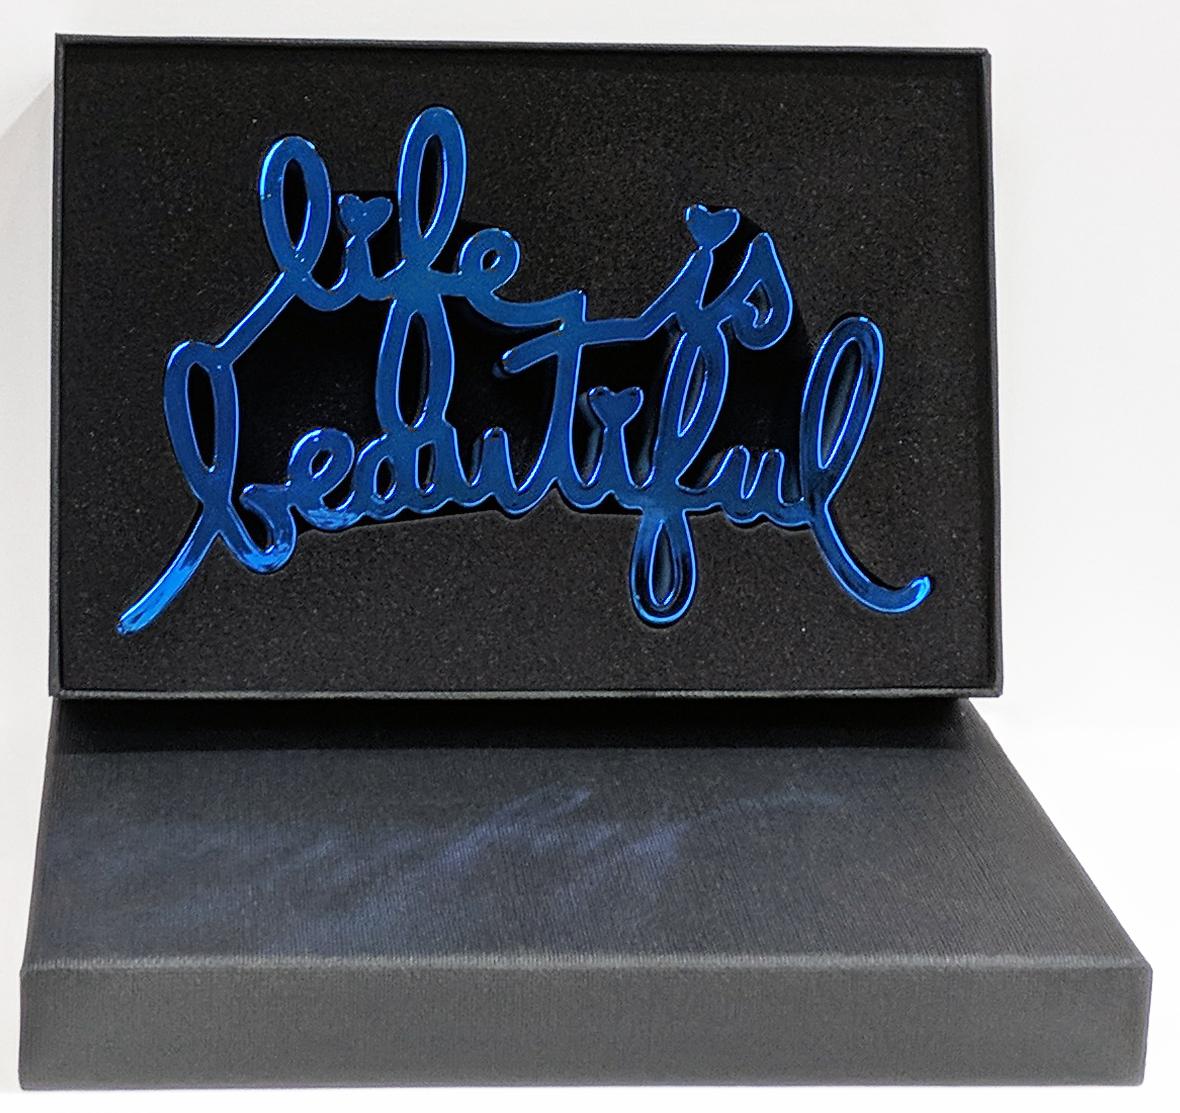 LIFE IS BEAUTIFUL (HARD CANDY BLUE) - Purple Abstract Sculpture by Mr Brainwash